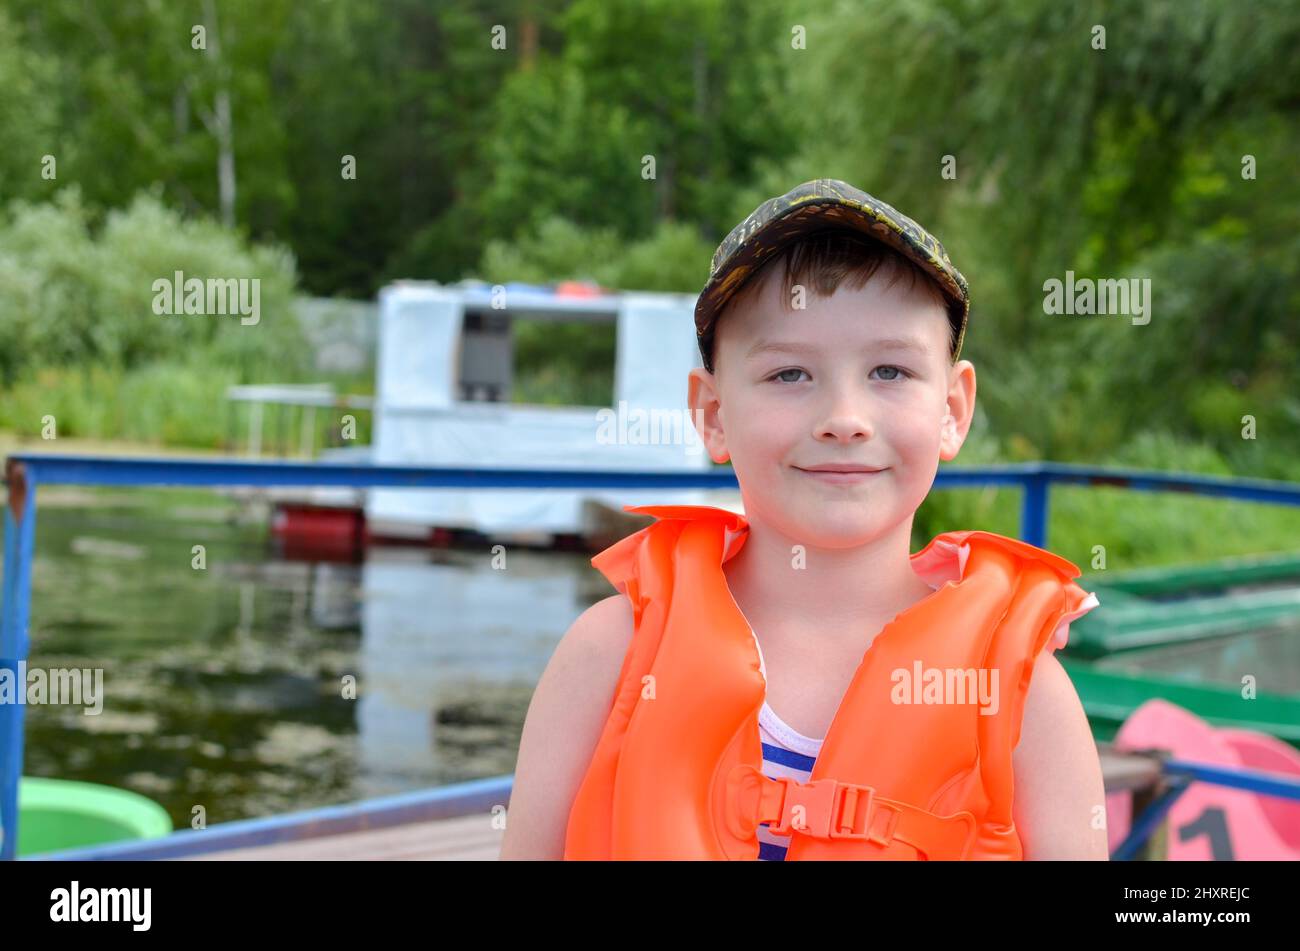 boy in a baseball cap and an orange inflatable life jacket against Stock Photo